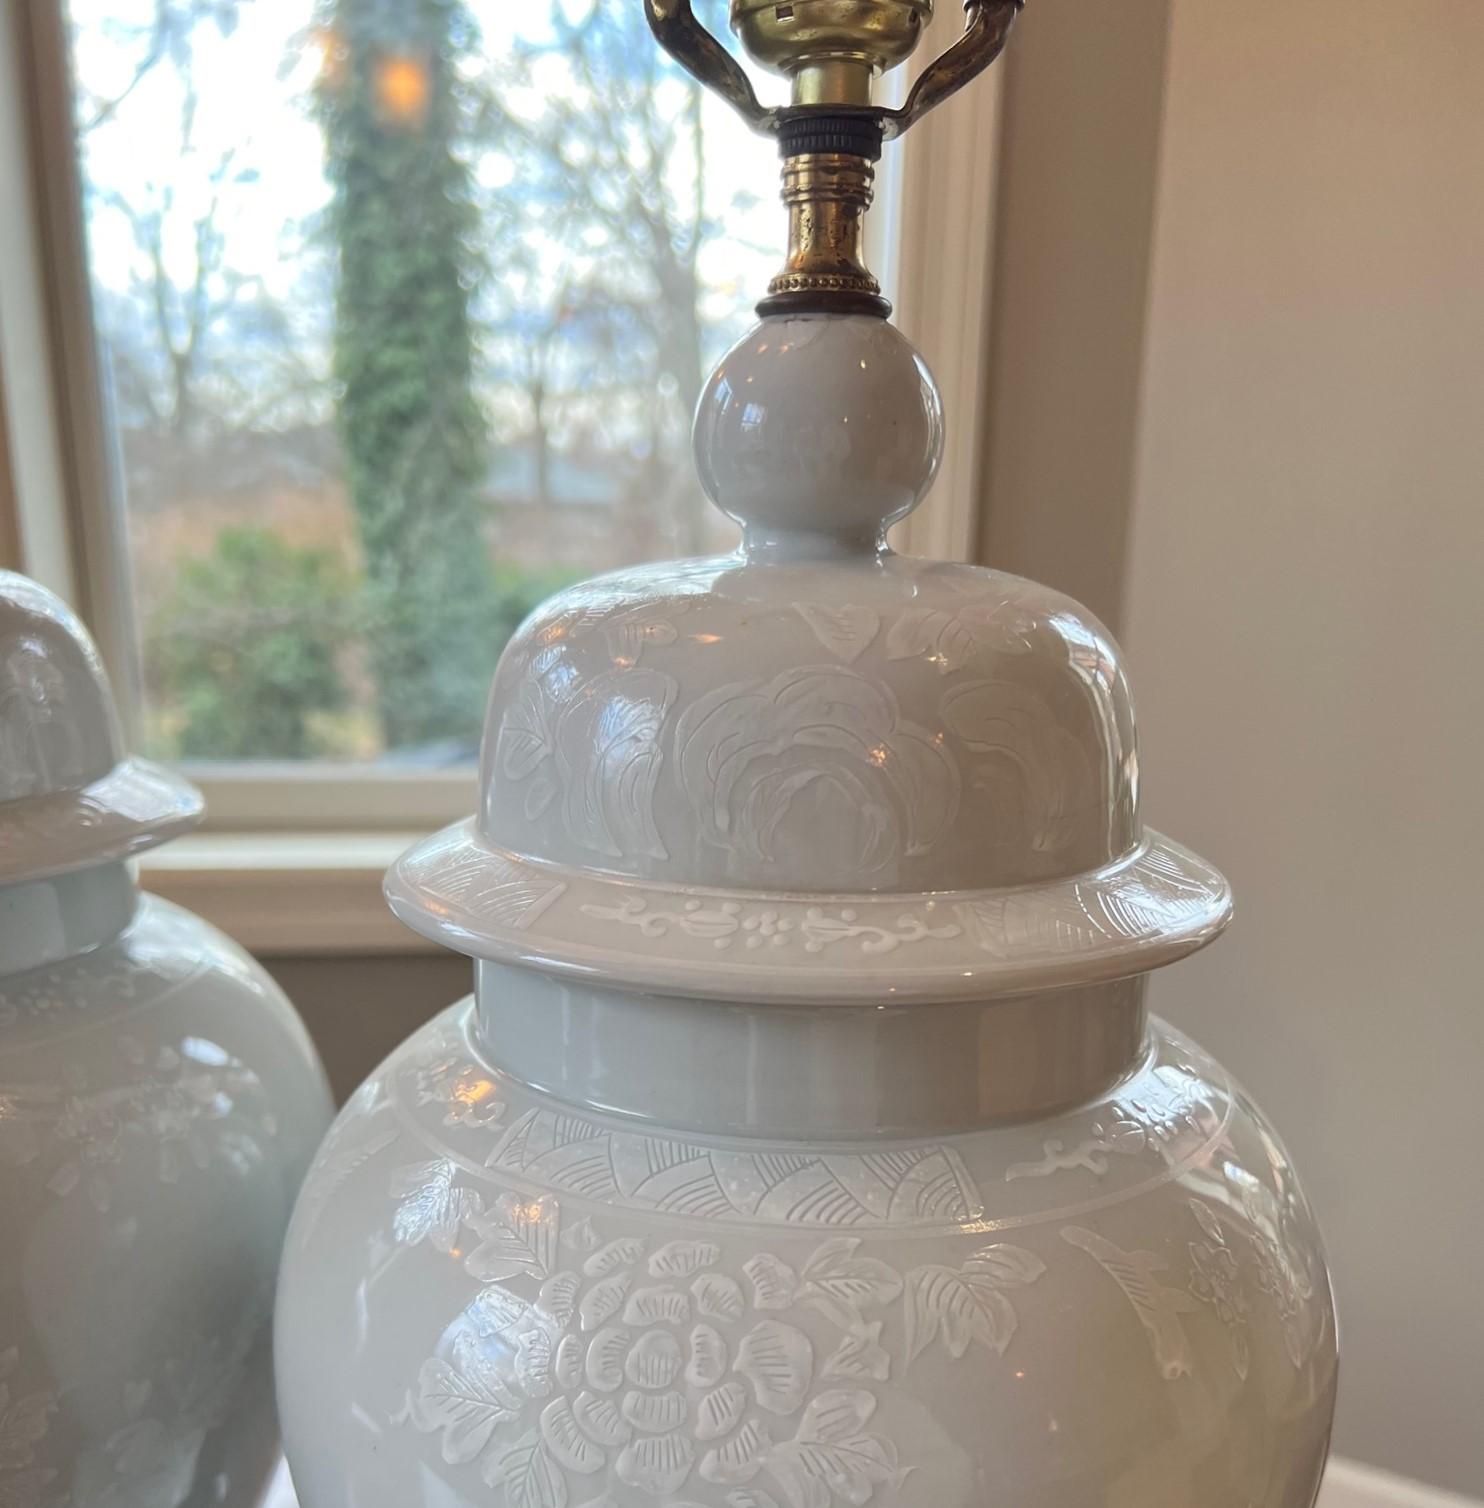 Vintage White Porcelain Ginger Jar Lamps with White Floral Decoration In Good Condition For Sale In Morristown, NJ